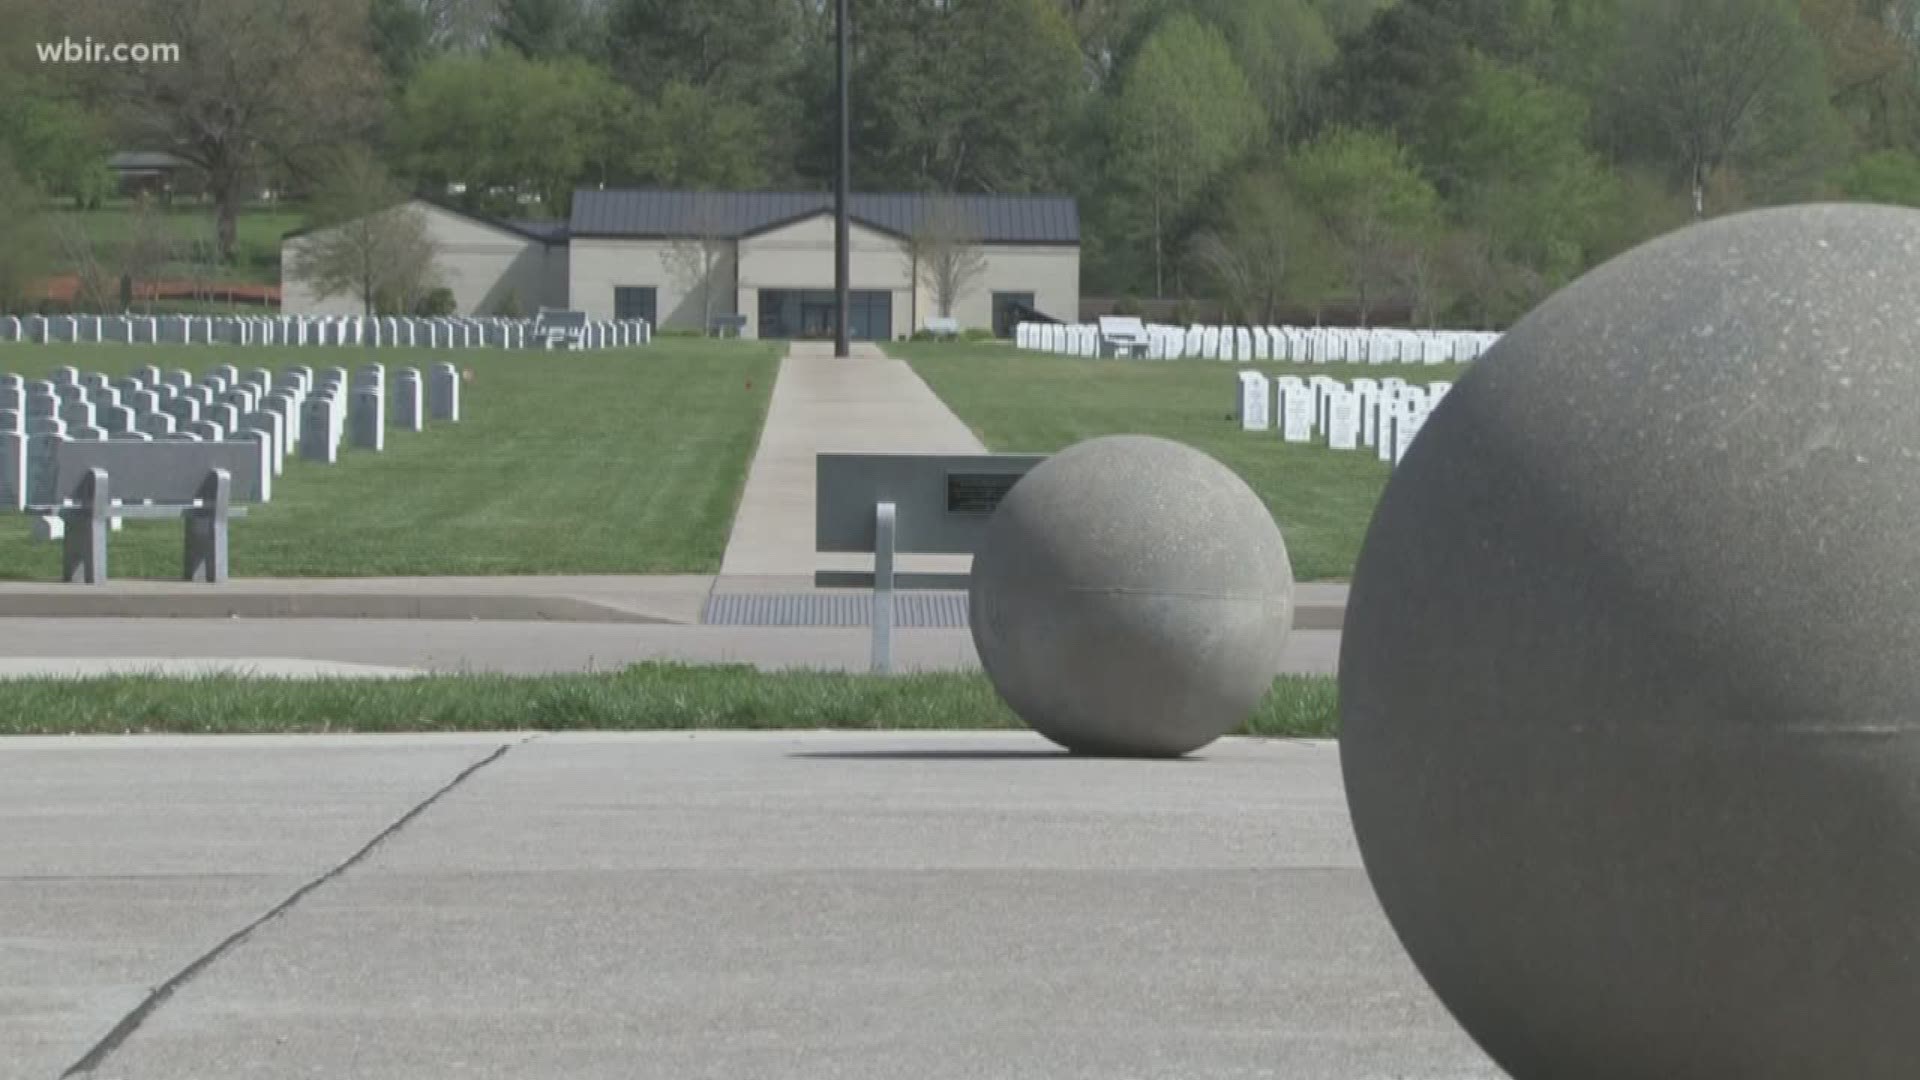 April 18, 2018: A veterans cemetery in East Tennessee is undergoing a major expansion and transformation.